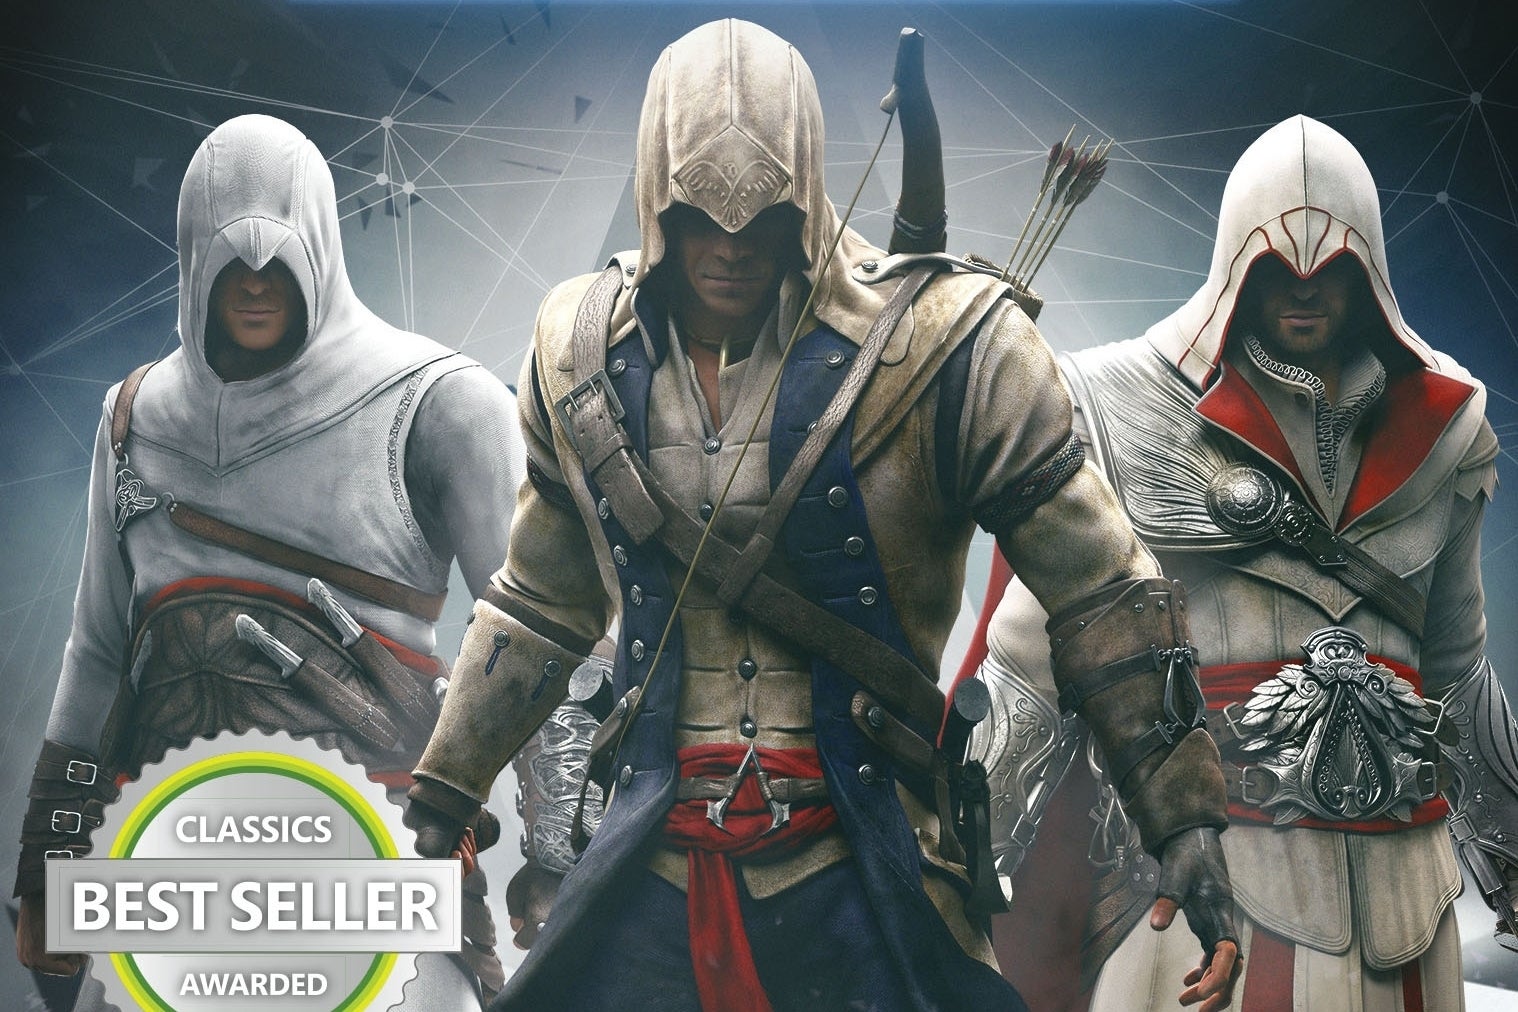 Image for Assassin's Creed Heritage Collection bundles five Assassin's Creed games